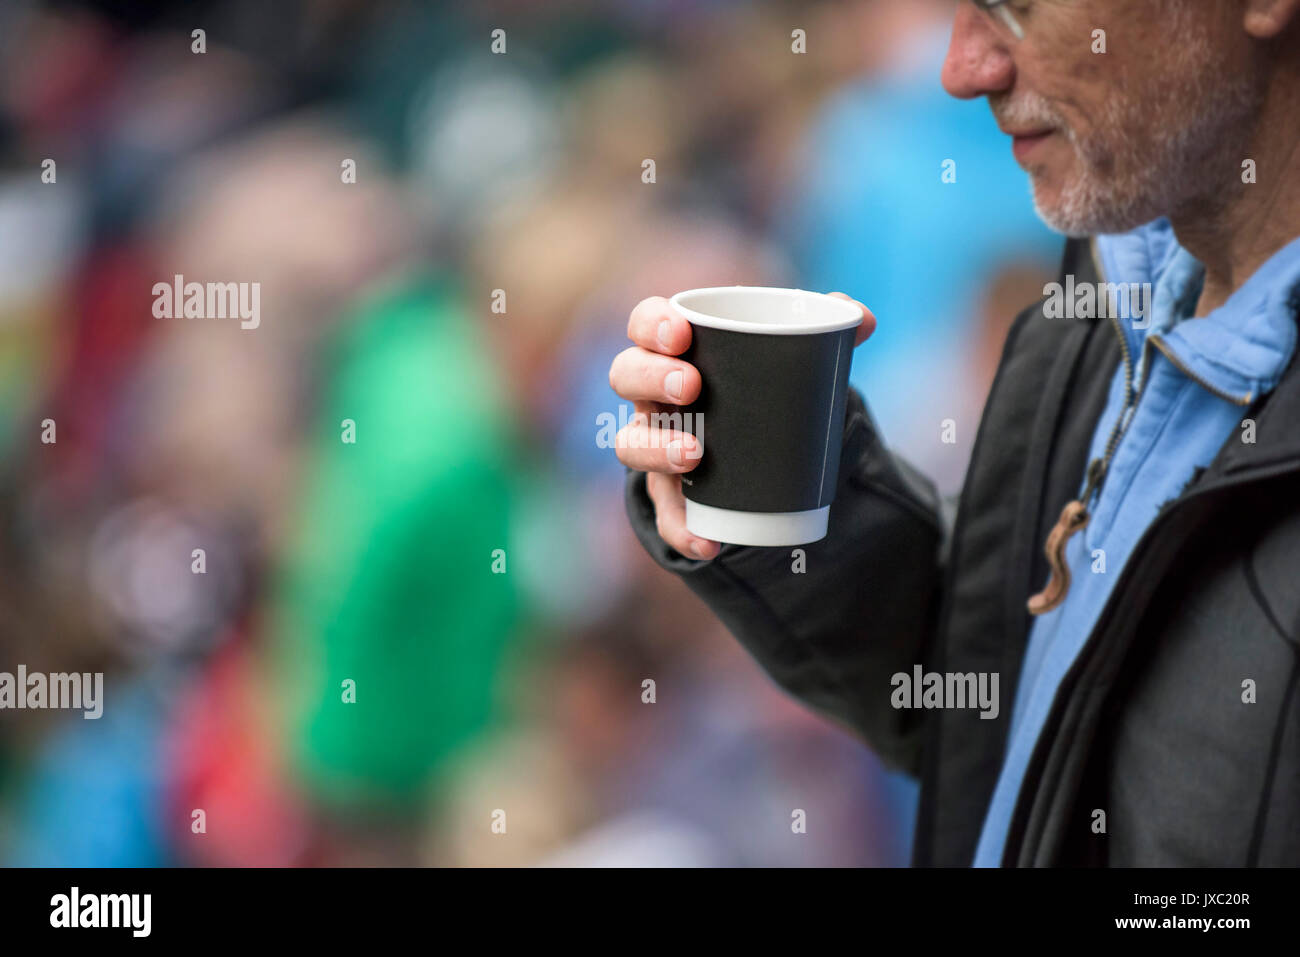 A man drinking coffee out of a disposable cup. Stock Photo